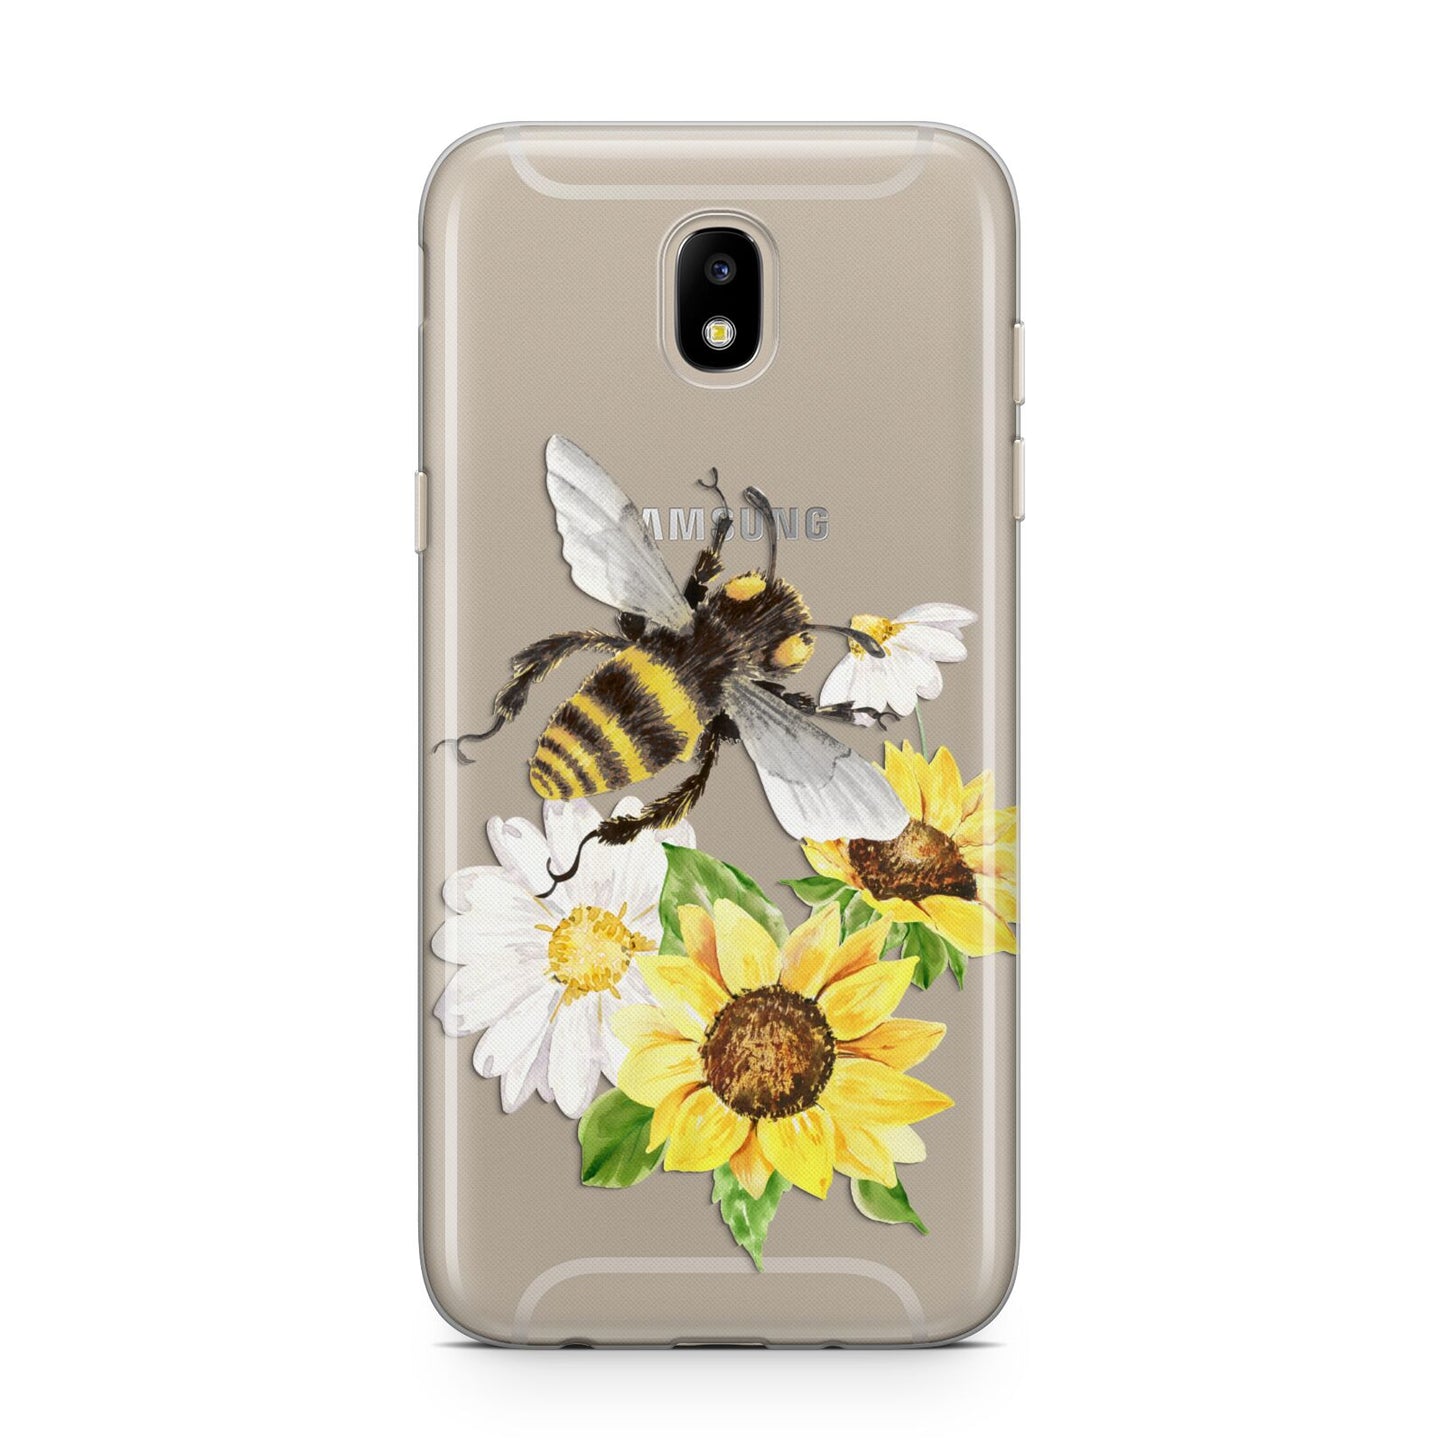 Watercolour Bee and Sunflowers Samsung J5 2017 Case